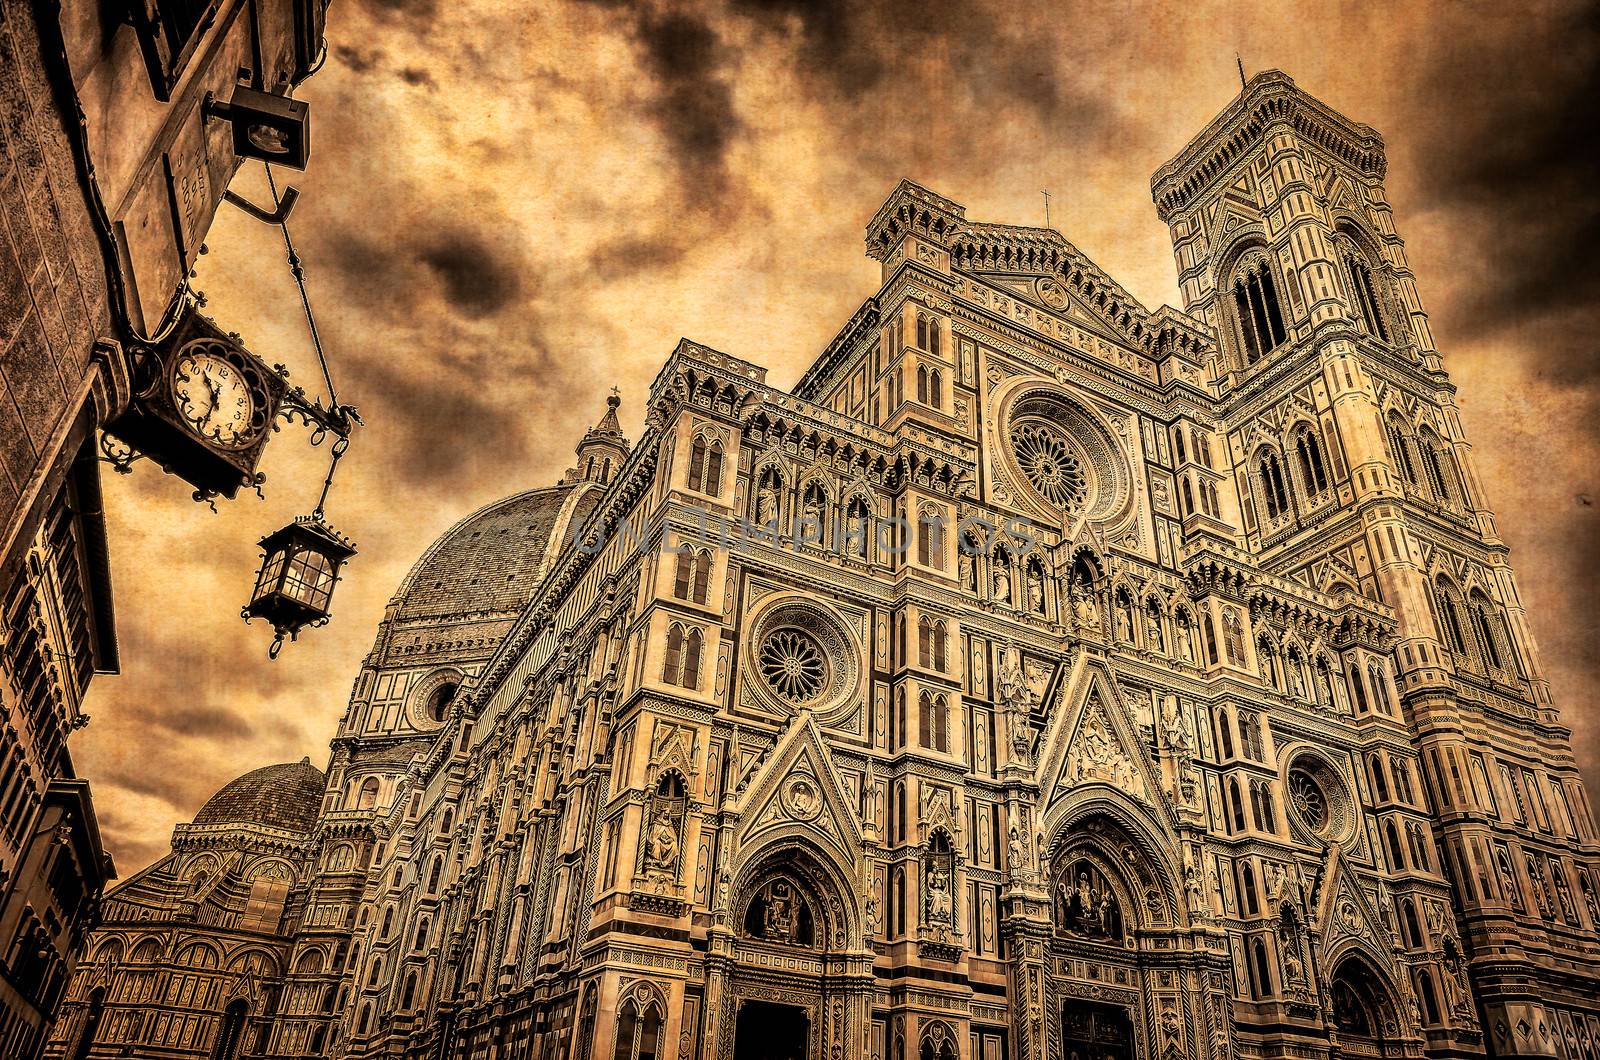 View of Florence Duomo cathedral and street clock in monochrome vintage style